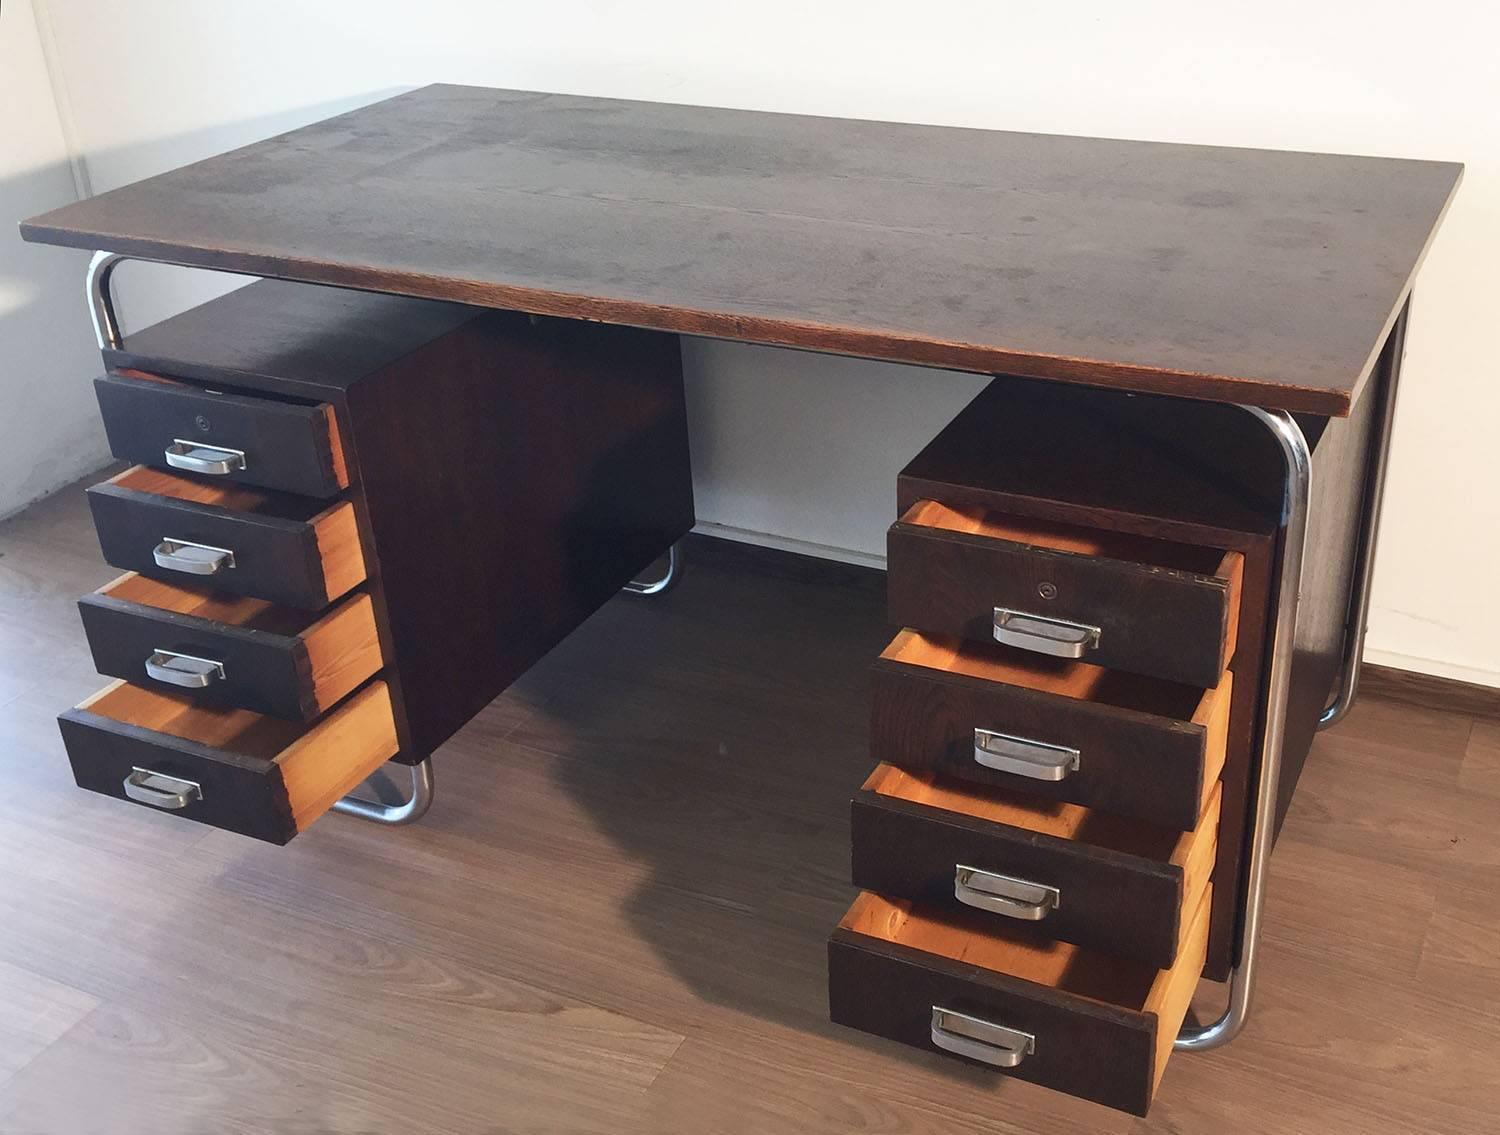 Czech Chromed Steel and Tinted Beech Bauhaus Desk by Petr Vichr for Kovona, 1930s For Sale